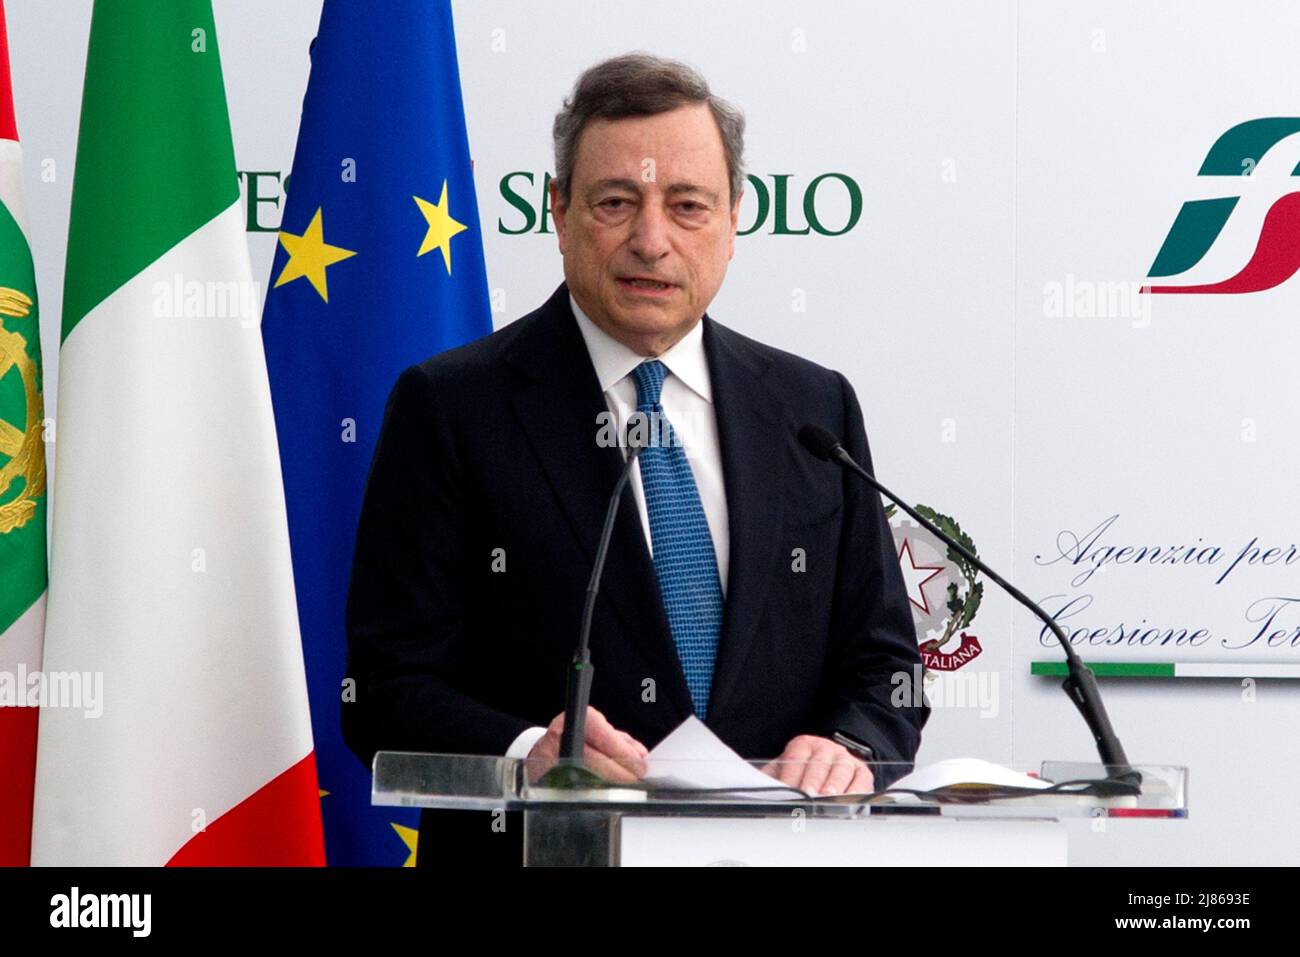 Sorrento, Italy. 13th May, 2022. Mario Draghi President of the Council of Ministers of the Italian Republic, during the forum Towards the South The European strategy for a new geopolitical, economic and socio-cultural season of the Mediterranean, organized by the Ministry for the South and the European house - Ambrosetti, which was held in Sorrento at Villa Zagara. Sorrento, Italy, May 13, 2022. (photo by Vincenzo Izzo/Sipa USA) Credit: Sipa USA/Alamy Live News Stock Photo